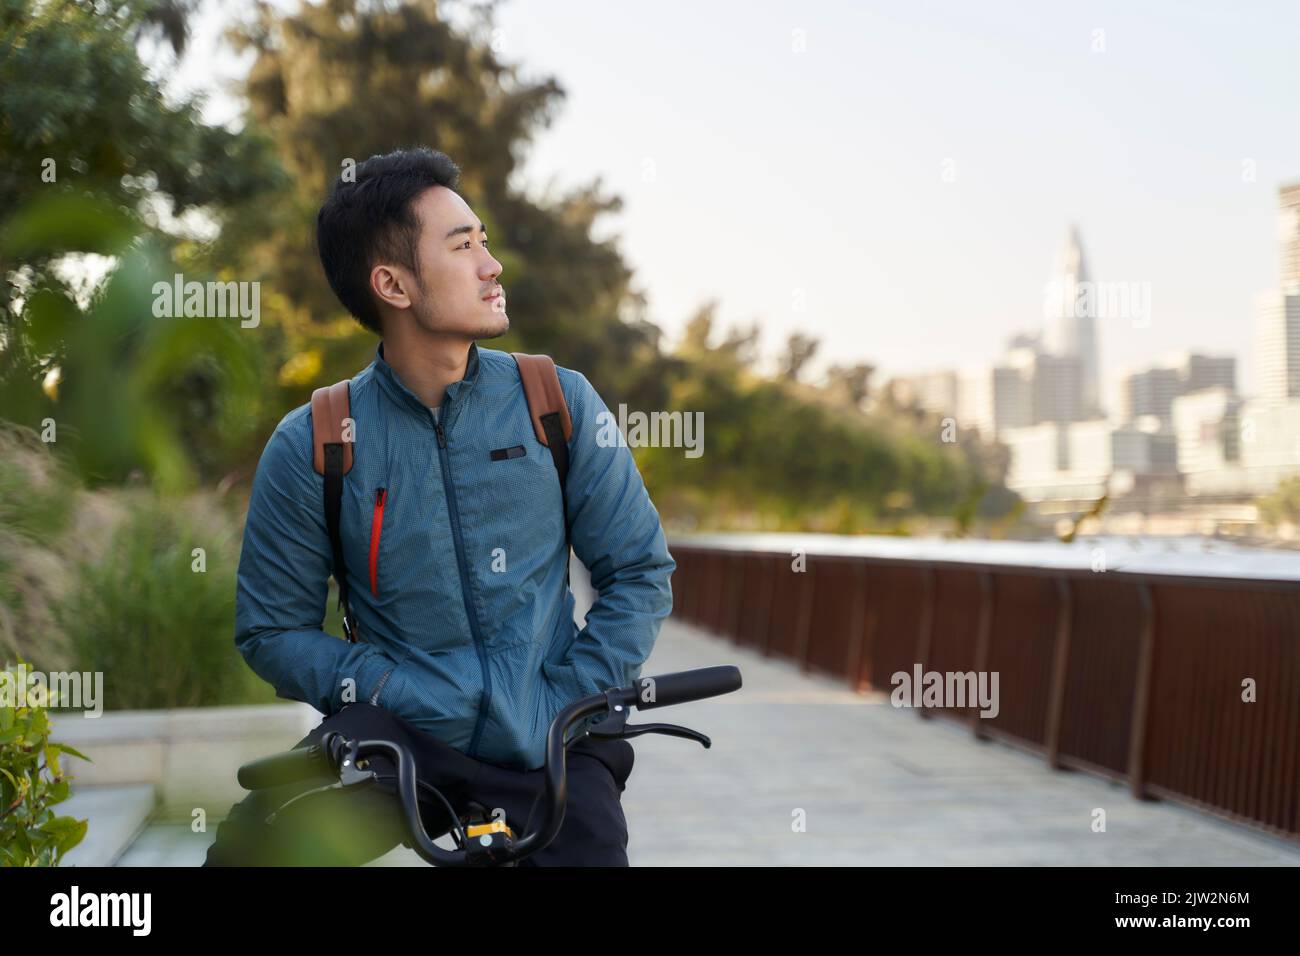 asian young adult man sitting on bicycle looking at view in city park Stock Photo